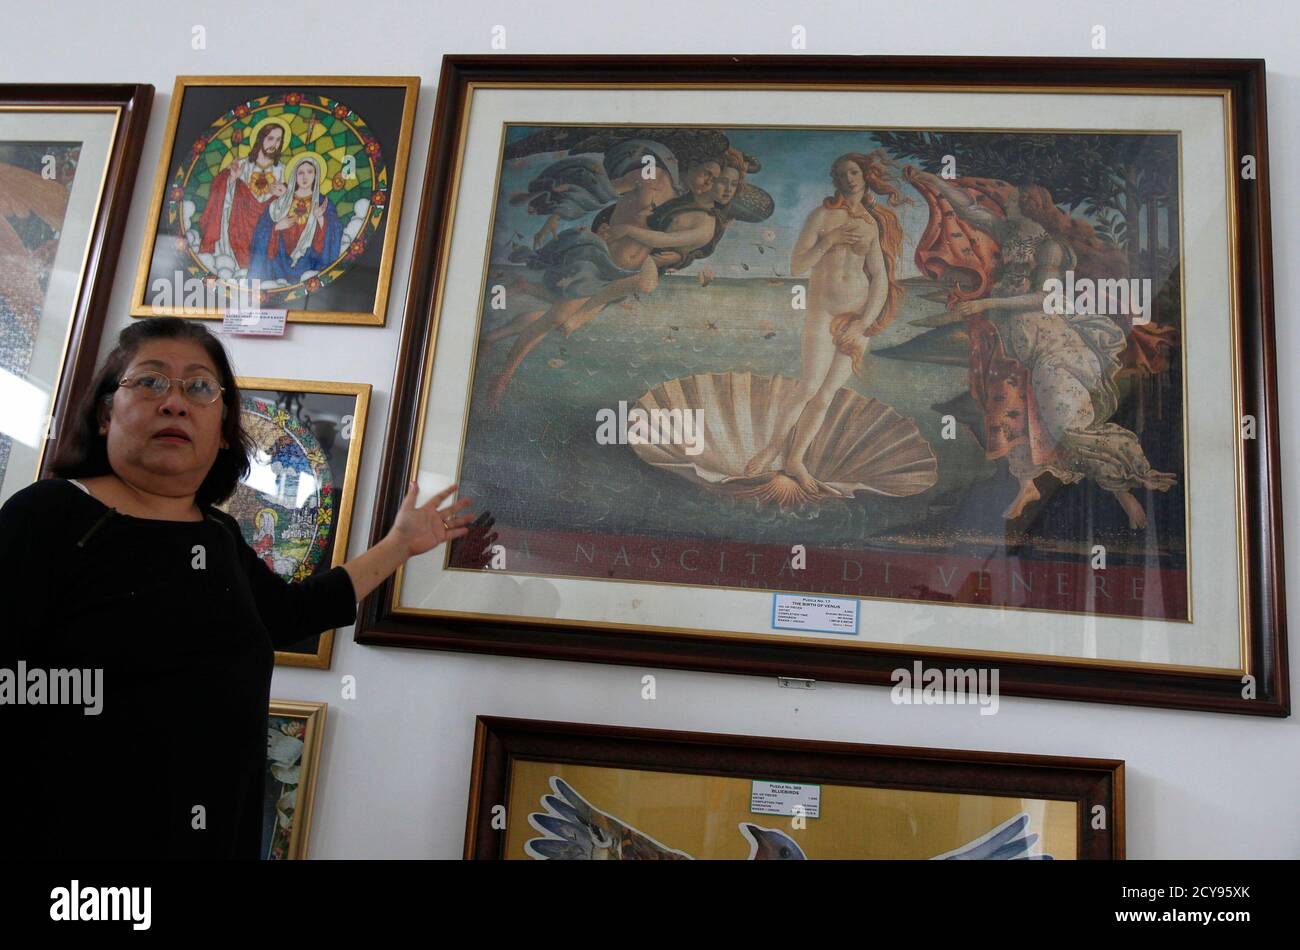 Filipino businesswoman Gina Lacuna shows her collection of jigsaw puzzle  boxes as she stands in front of an 18,000-piece jigsaw puzzle of Retablo De  Santa Columba, which took her 1095 hours to